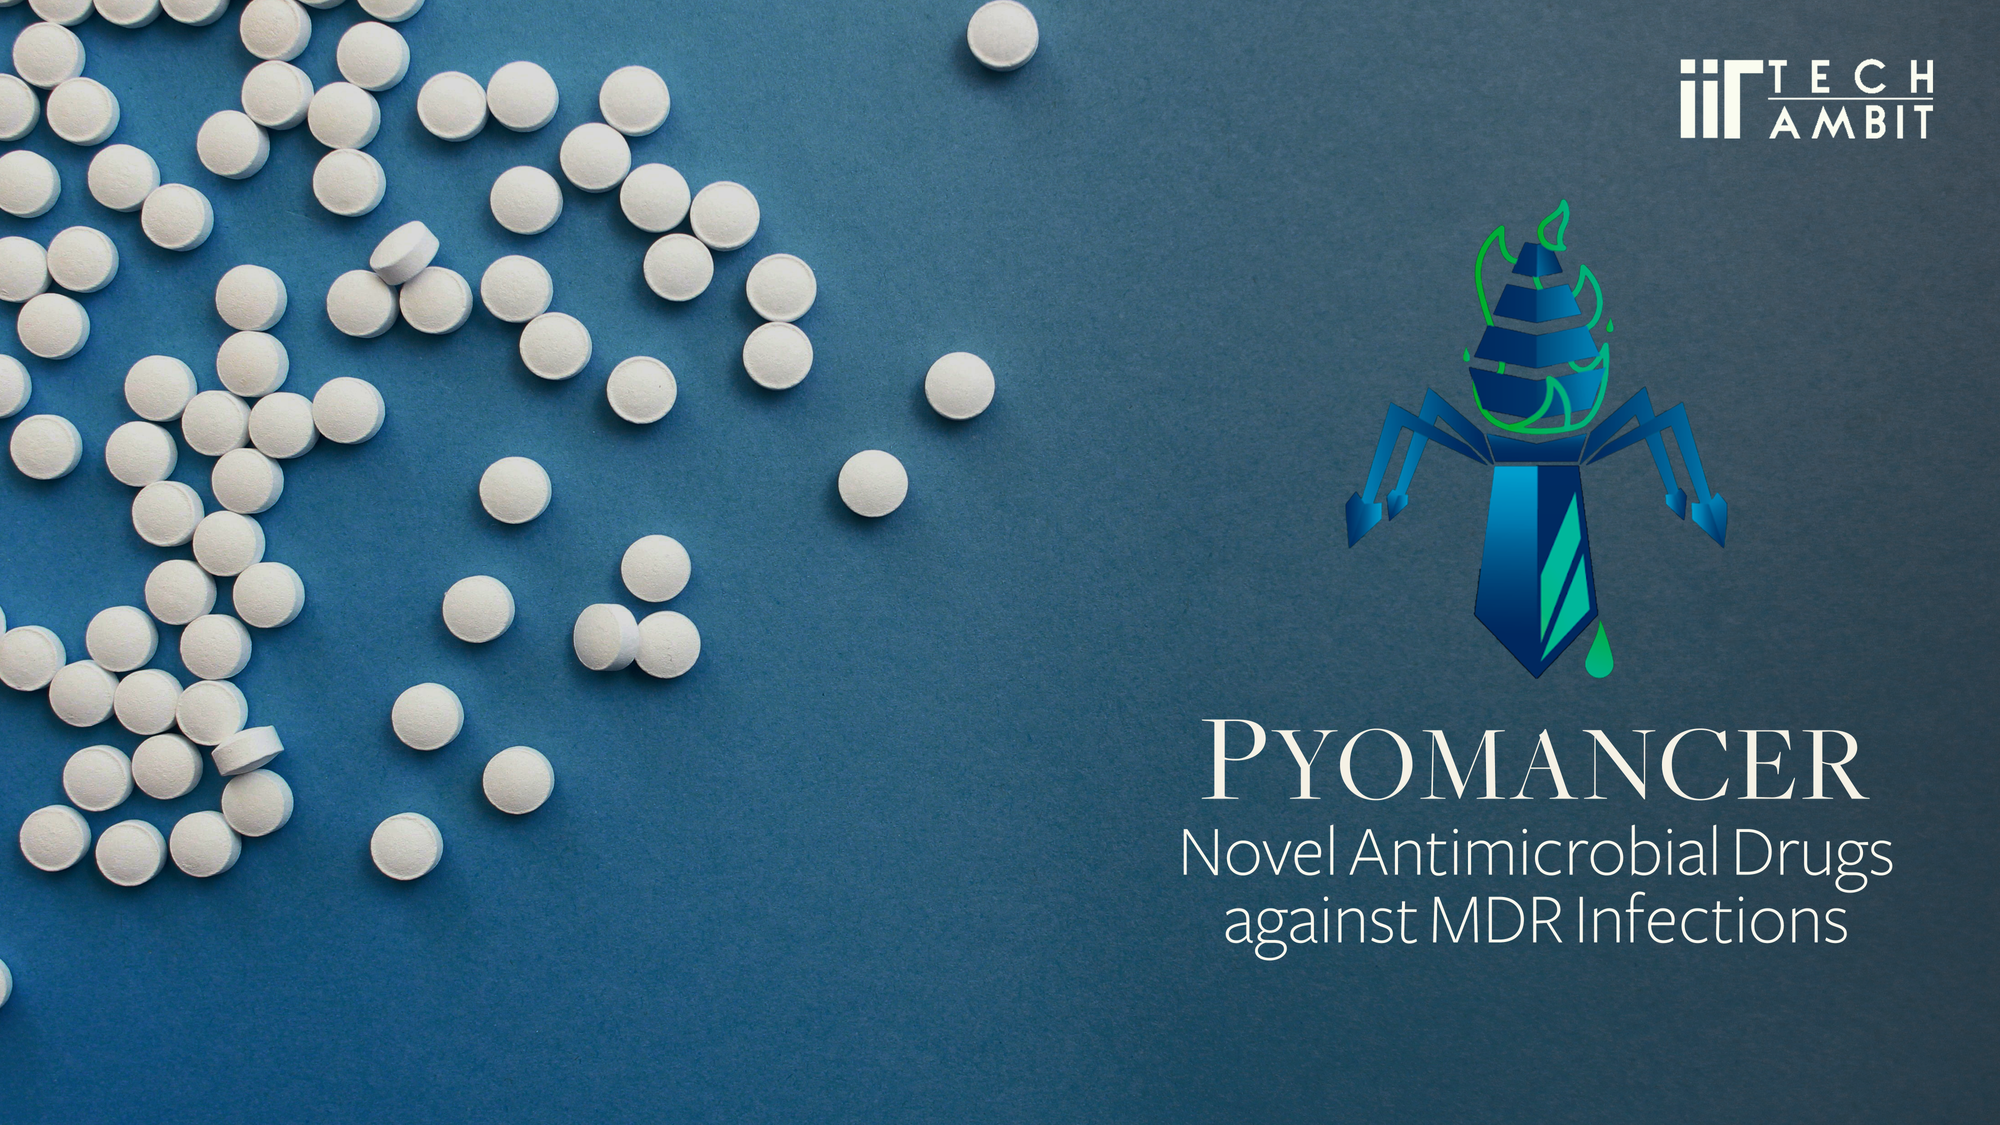 Pyomancer: Novel Antimicrobial Drugs against MDR Infections